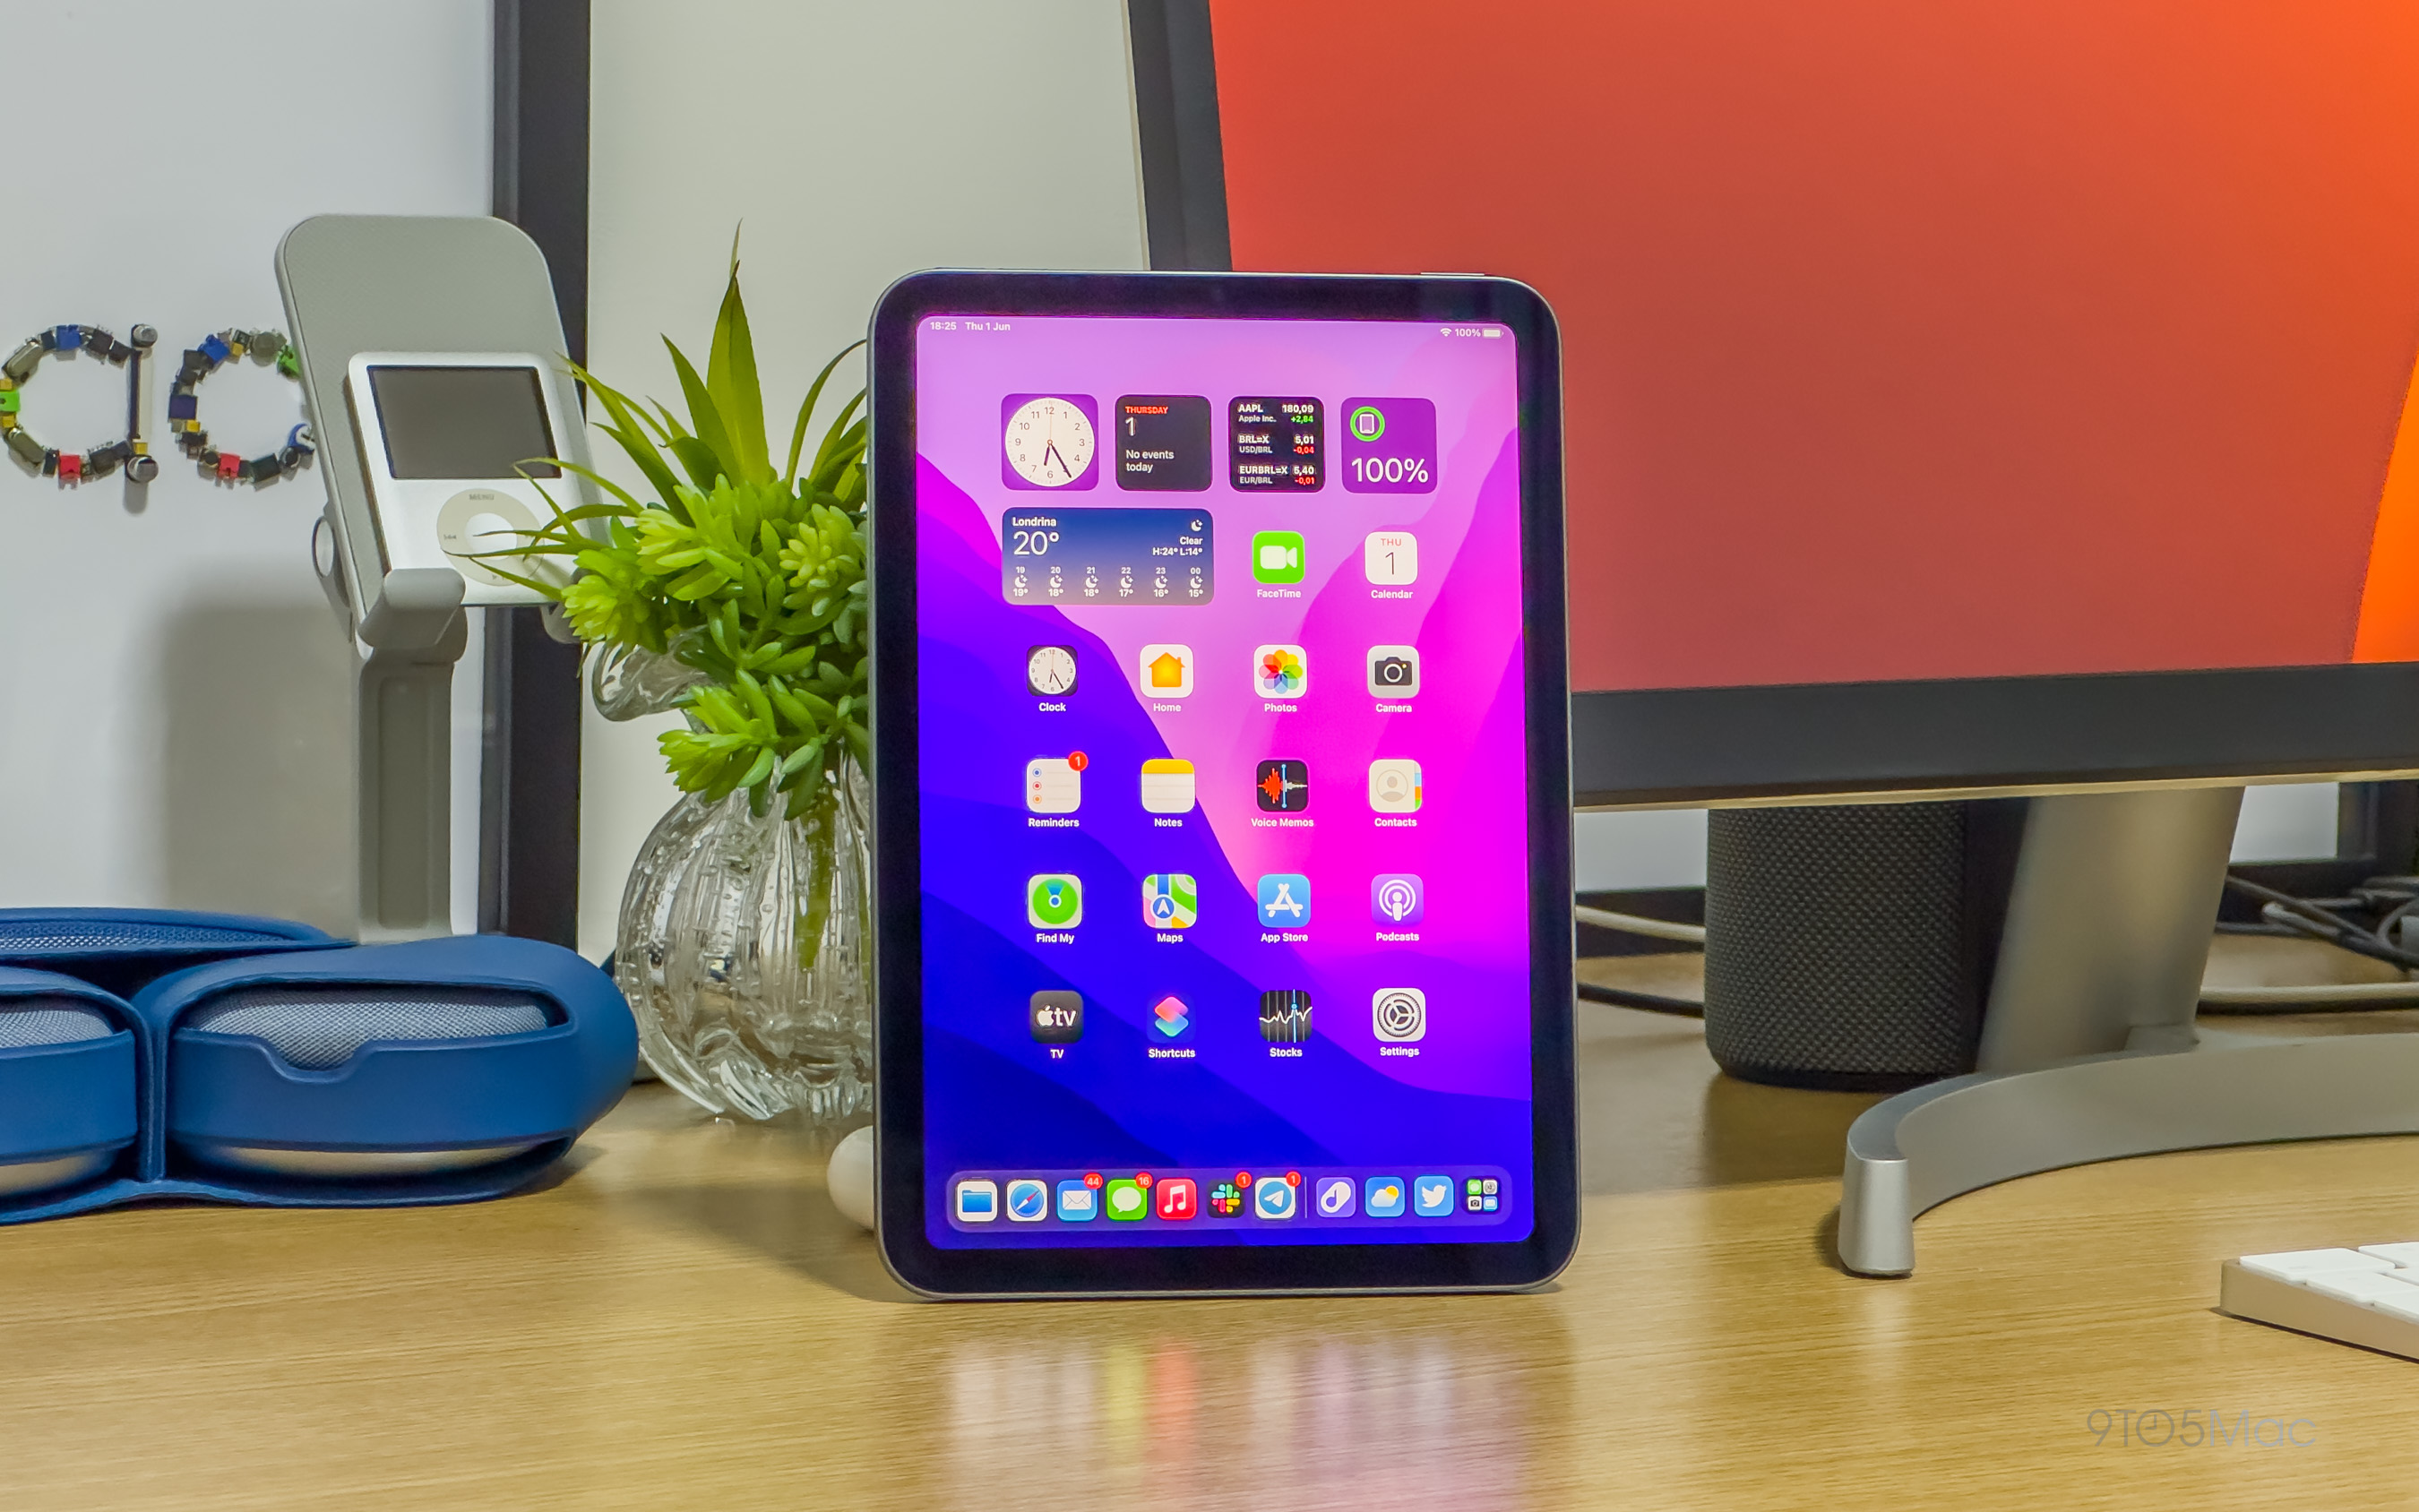 iPad mini remains the best for people who want a portable tablet